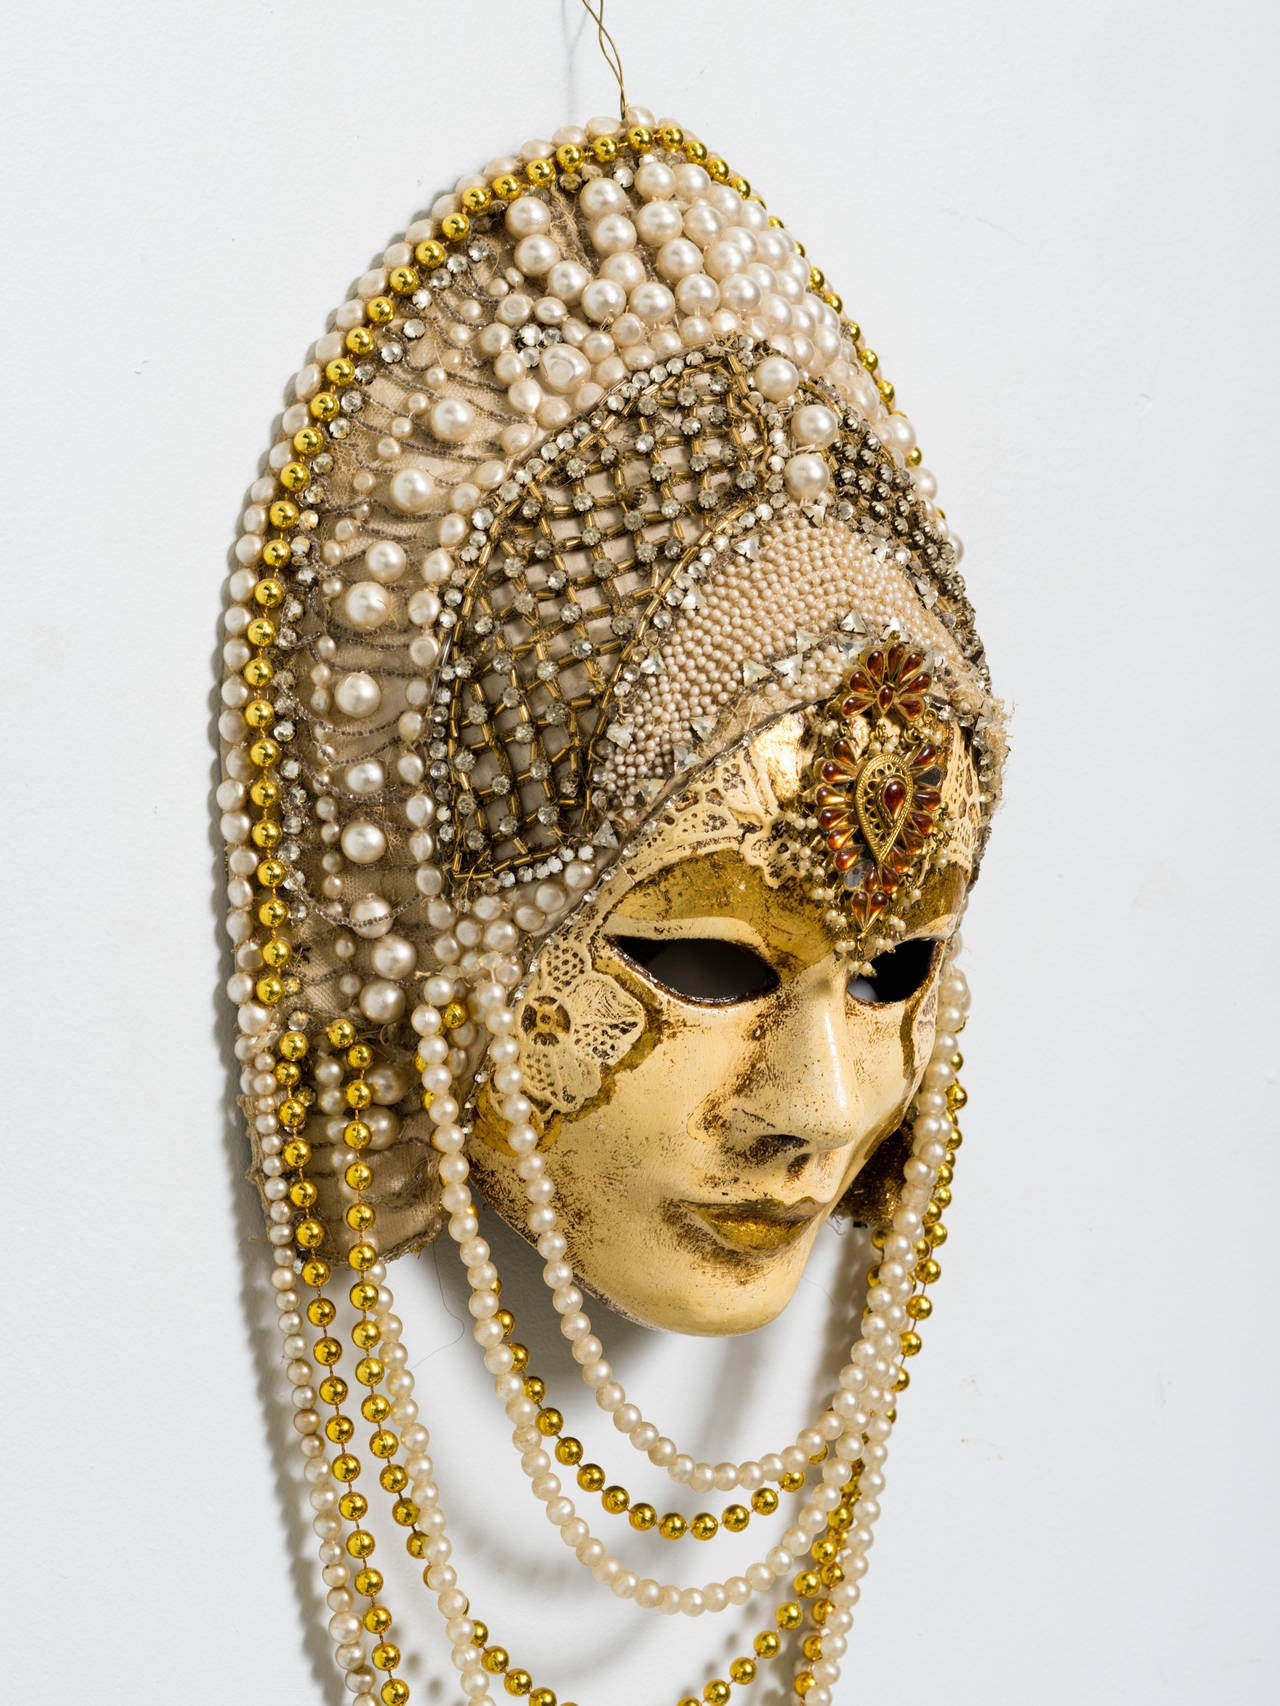 Elaborate carnival masquerade.
Full face with faux pearls.